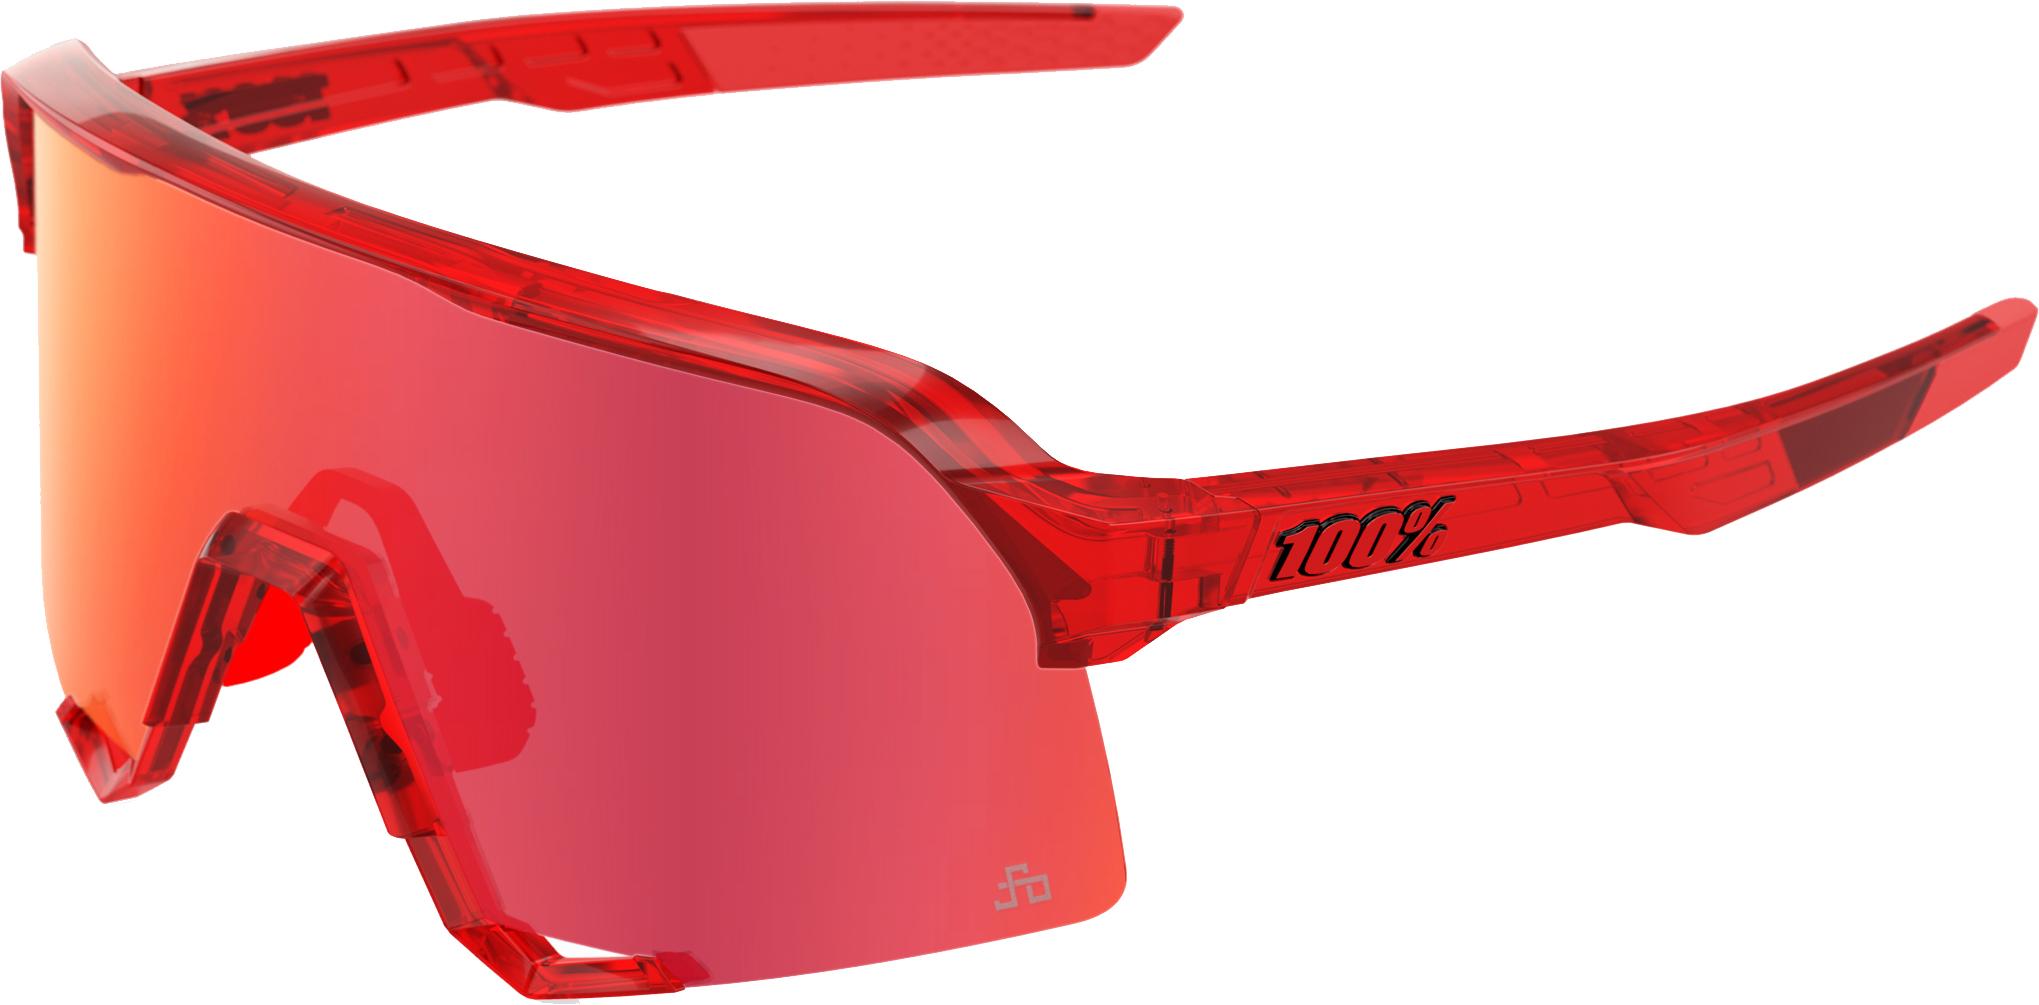 100% S3 Peter Sagan Le Gloss Translucent Red Sunglasses (hiper Red Mirror Lens)